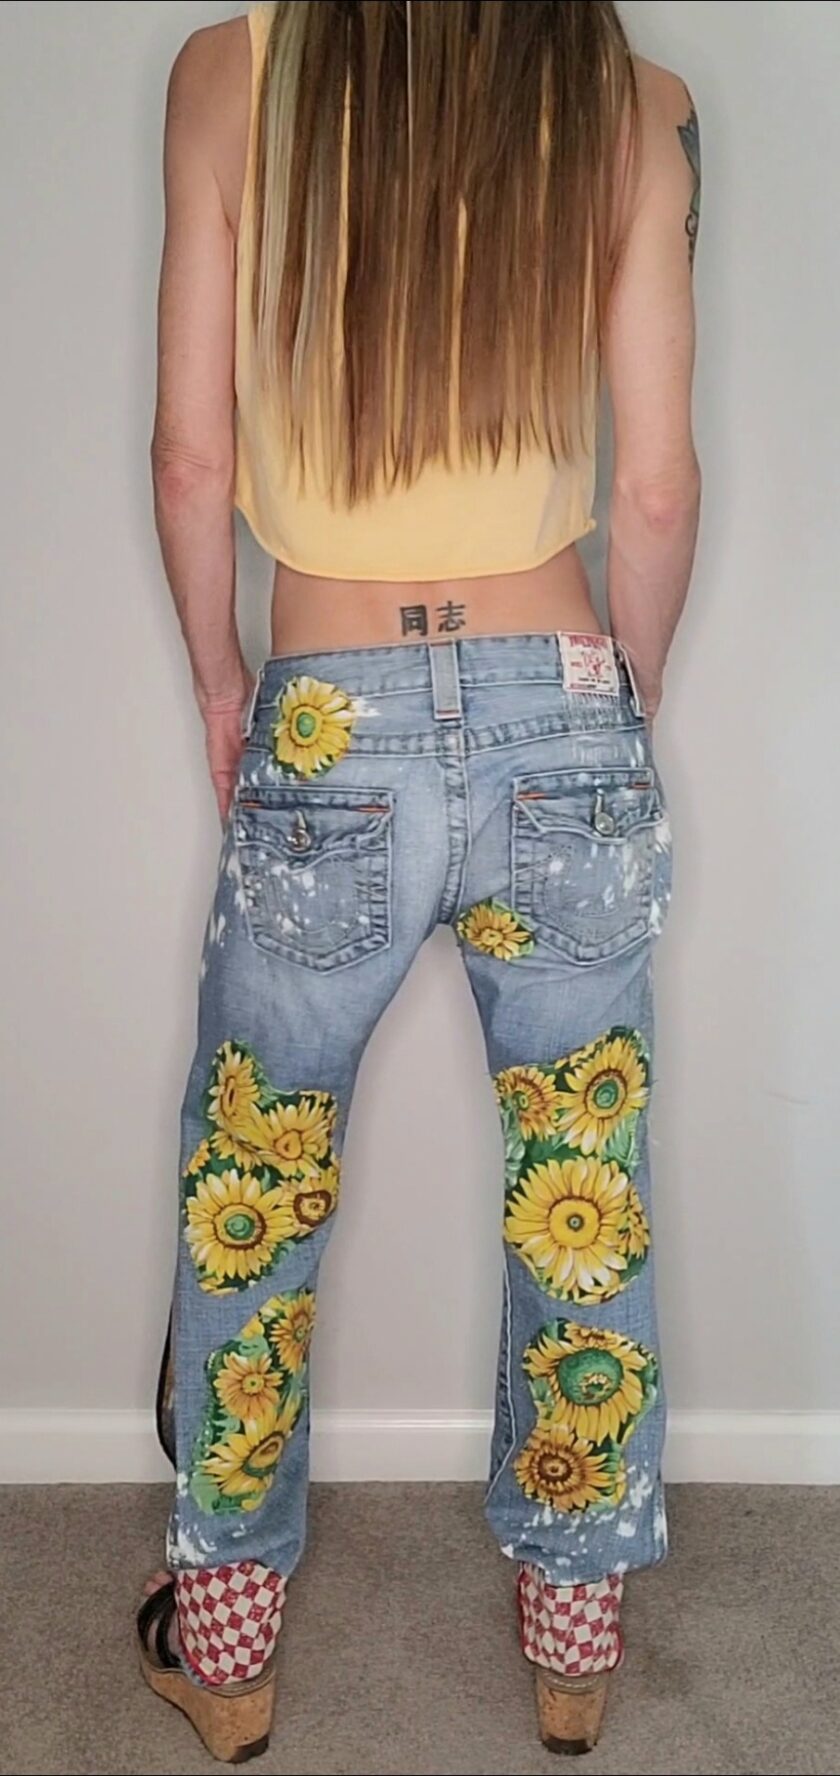 a woman wearing a pair of jeans with sunflowers on them.